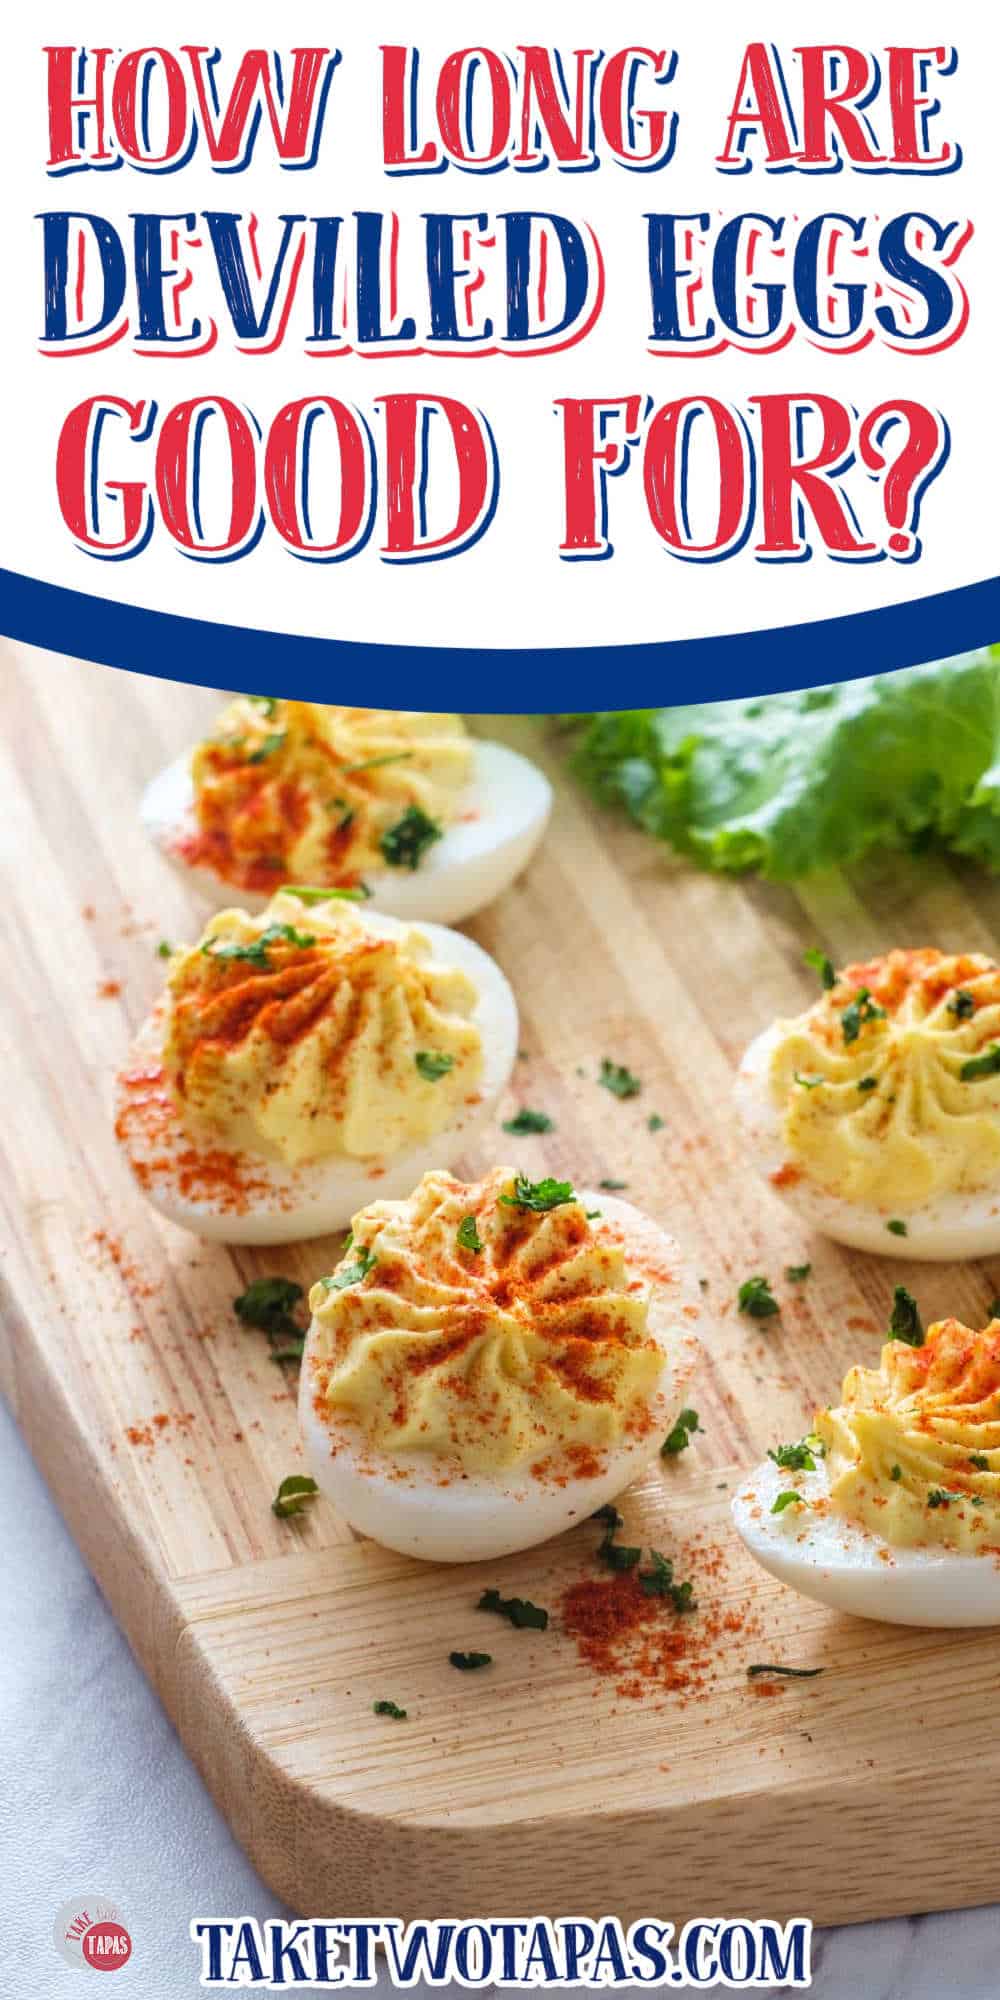 deviled eggs on a wood board with white banner and text